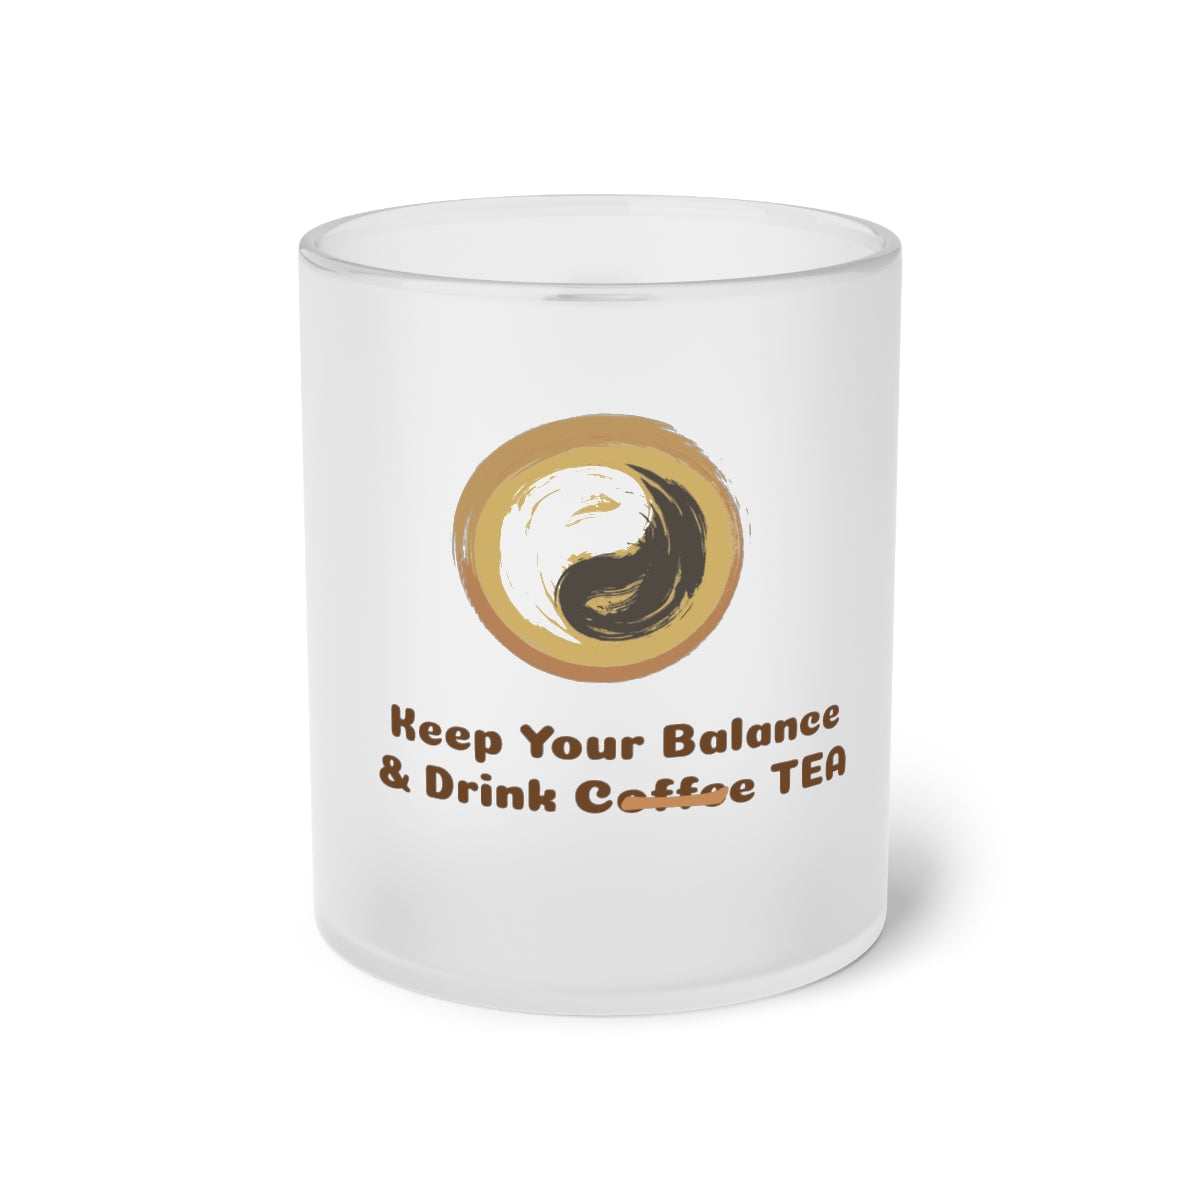 Keep your balance and drink tea - tea cups - gifts for tea lovers - Personal Hour for Yoga and Meditations 